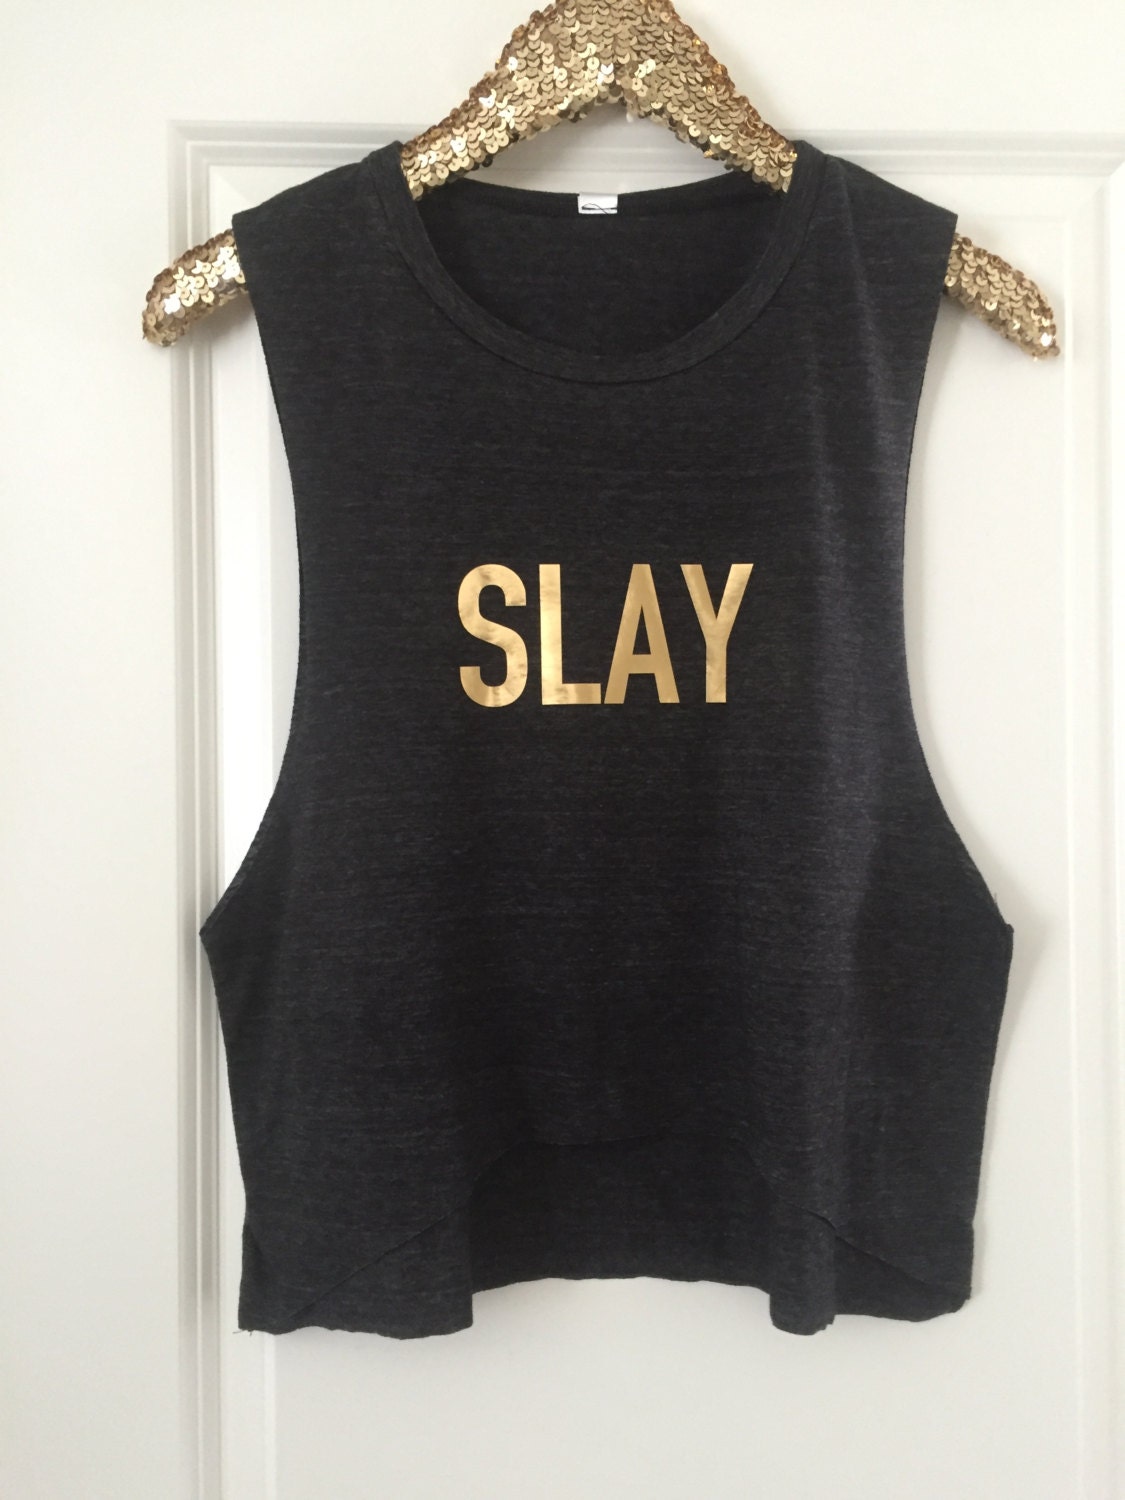 SLAY Cropped Front Muscle Tank Top- Gold Foil - Gift for her // Coworker gift // friend gift // gym top // workout // Fitness / 6003